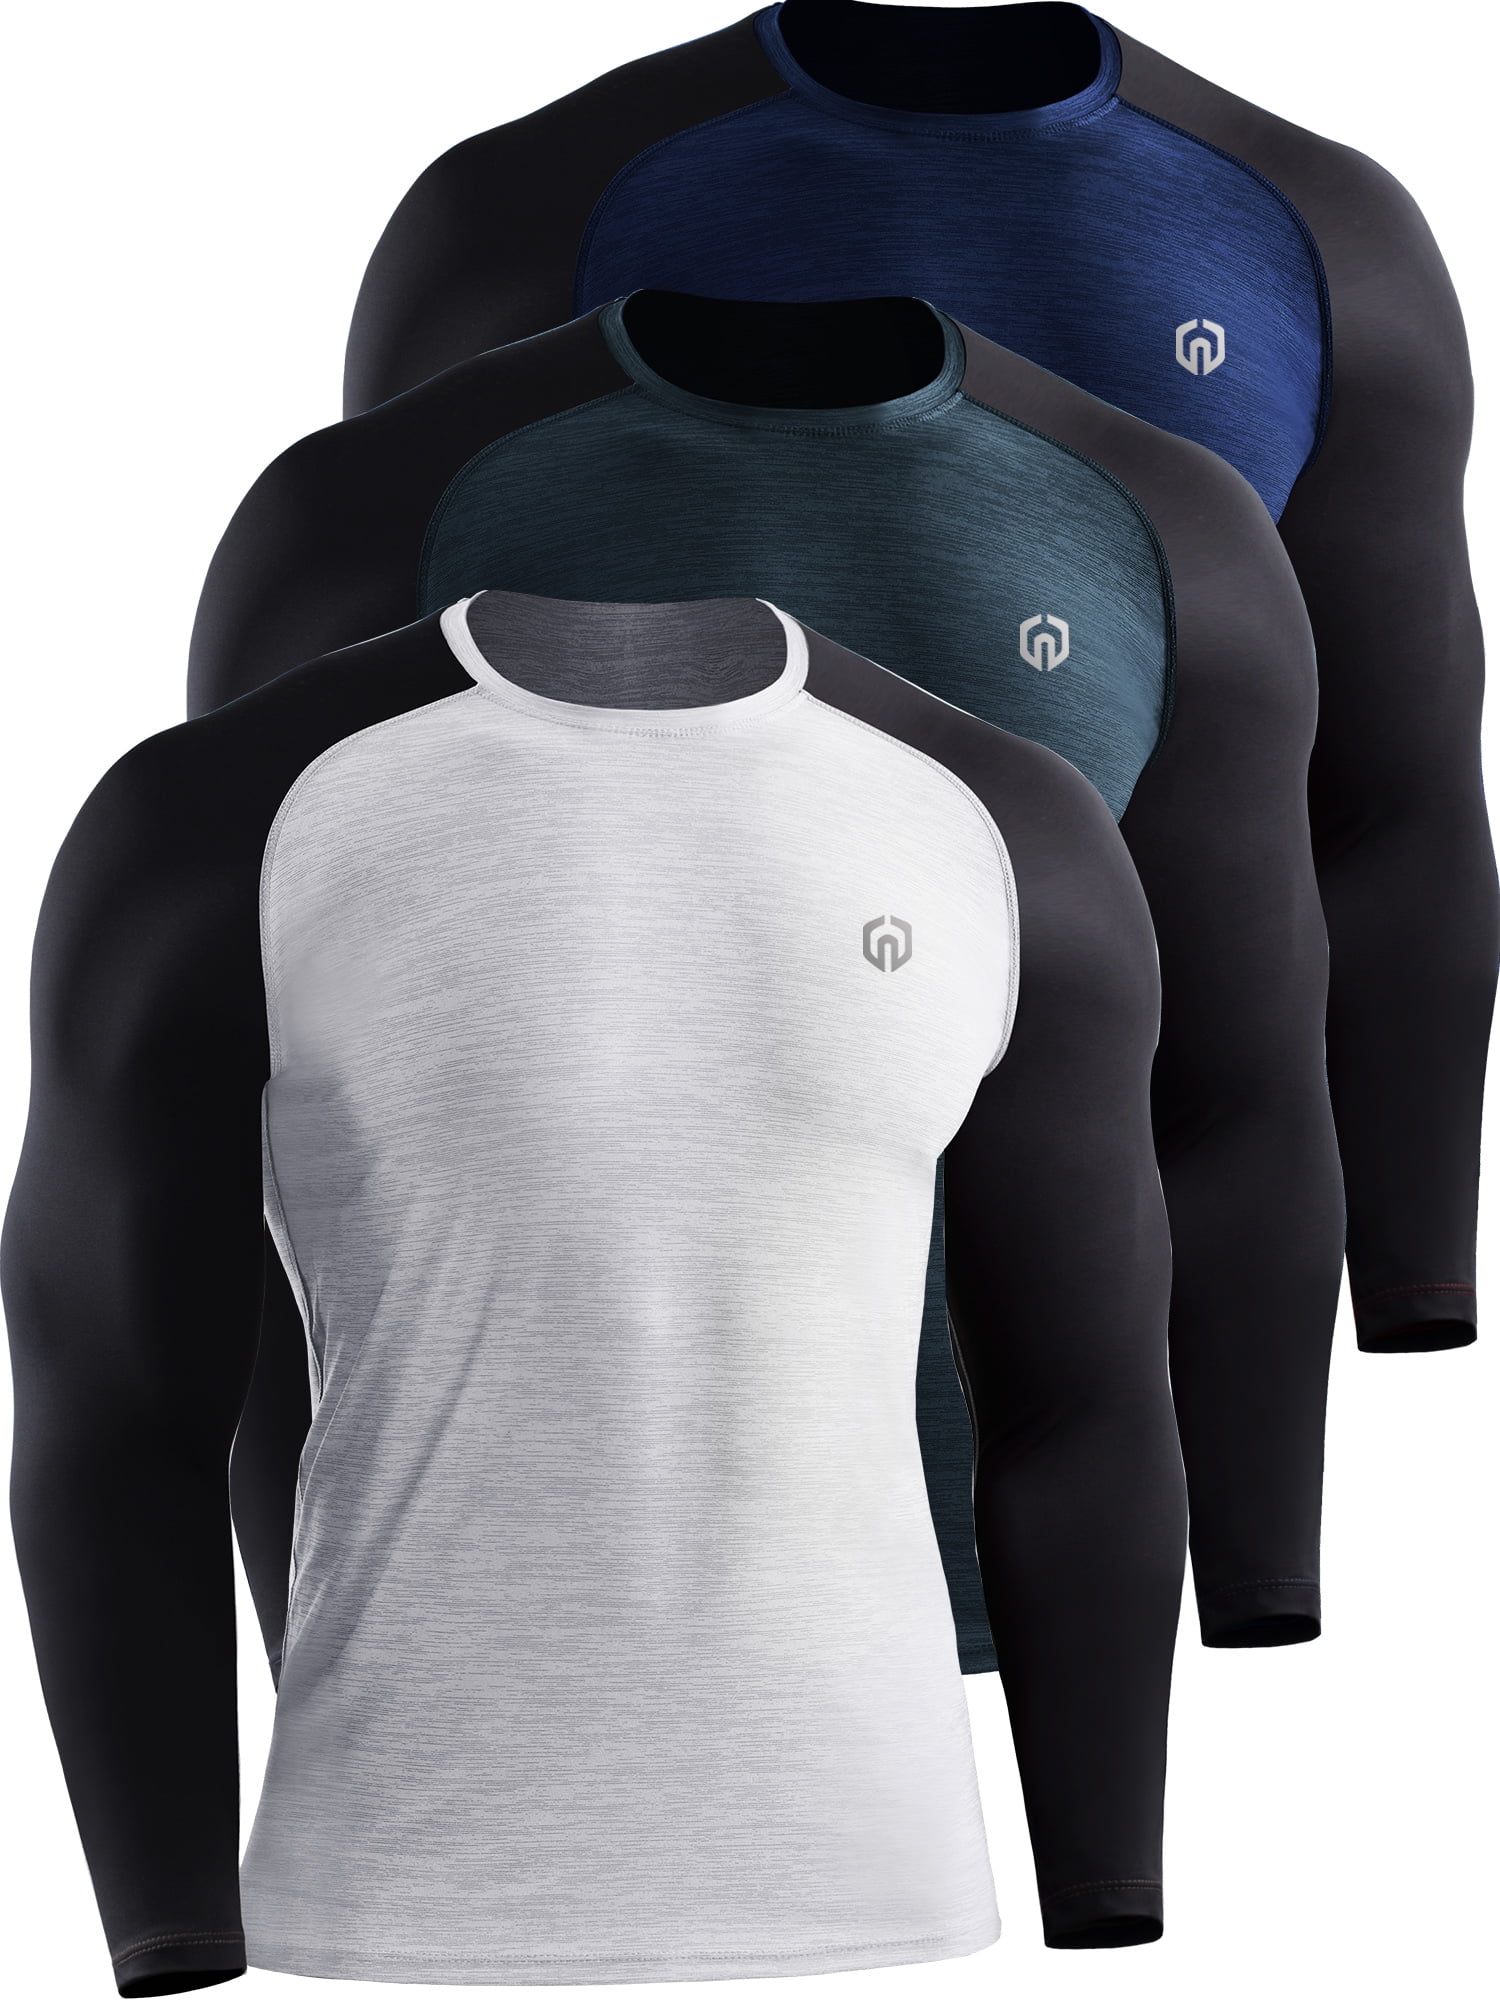 NELEUS Mens Dry Fit Long Sleeve Athletic Workout Shirts 3 Pack,Navy  Blue+Blackish Green+White,US Size S